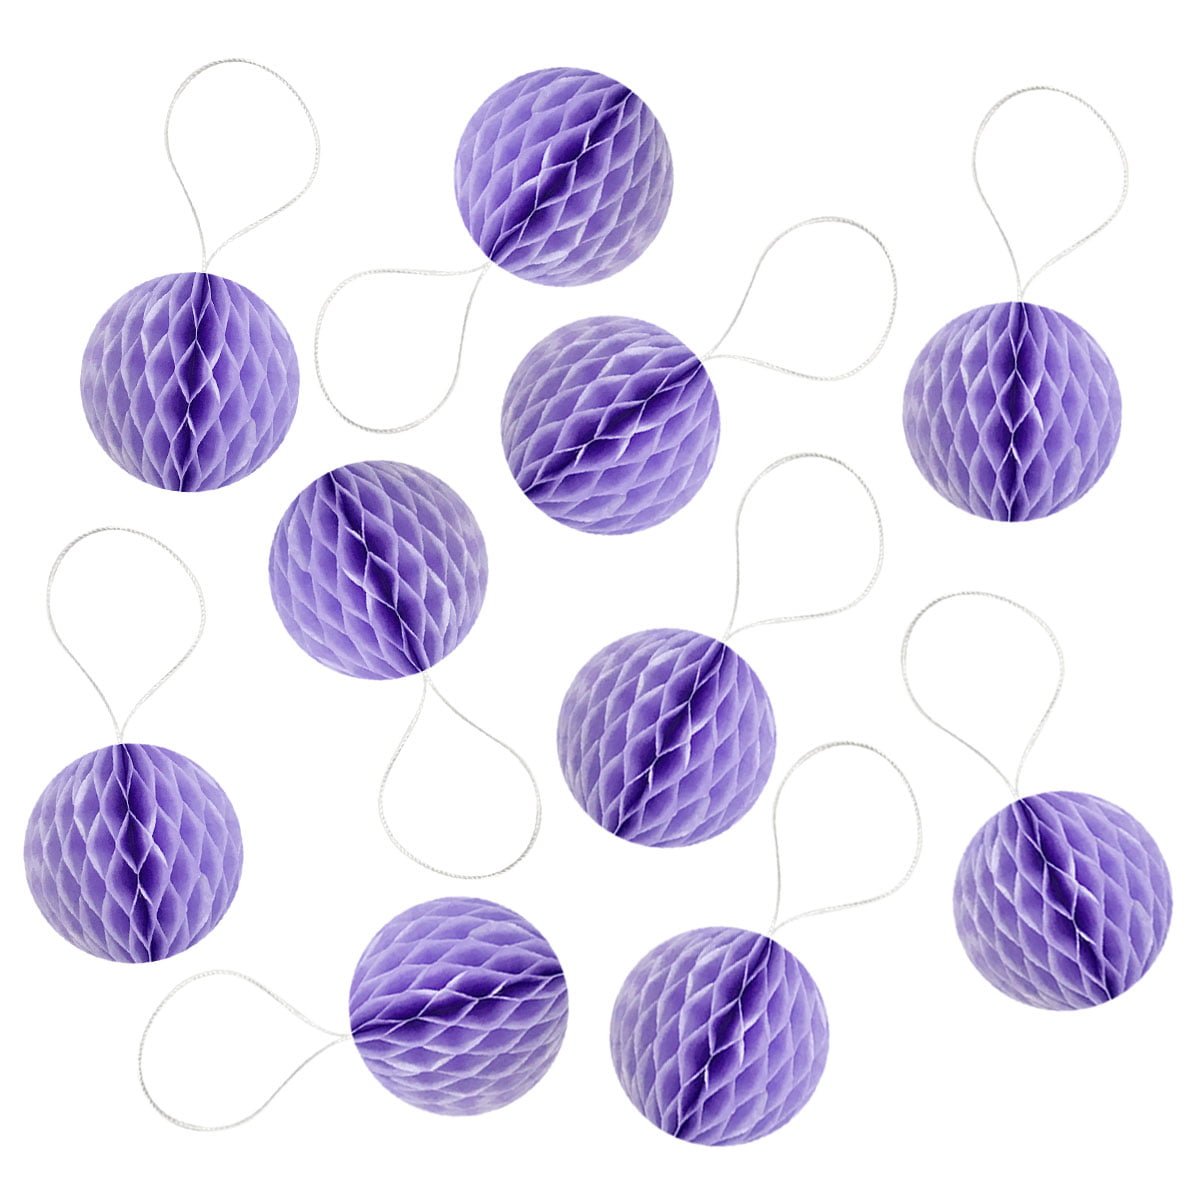 Wrapables 12 inch Set of 3 Tissue Pom Poms Party Decorations for Weddings, Birthday Parties Baby Showers and Nursery Dcor, Purple